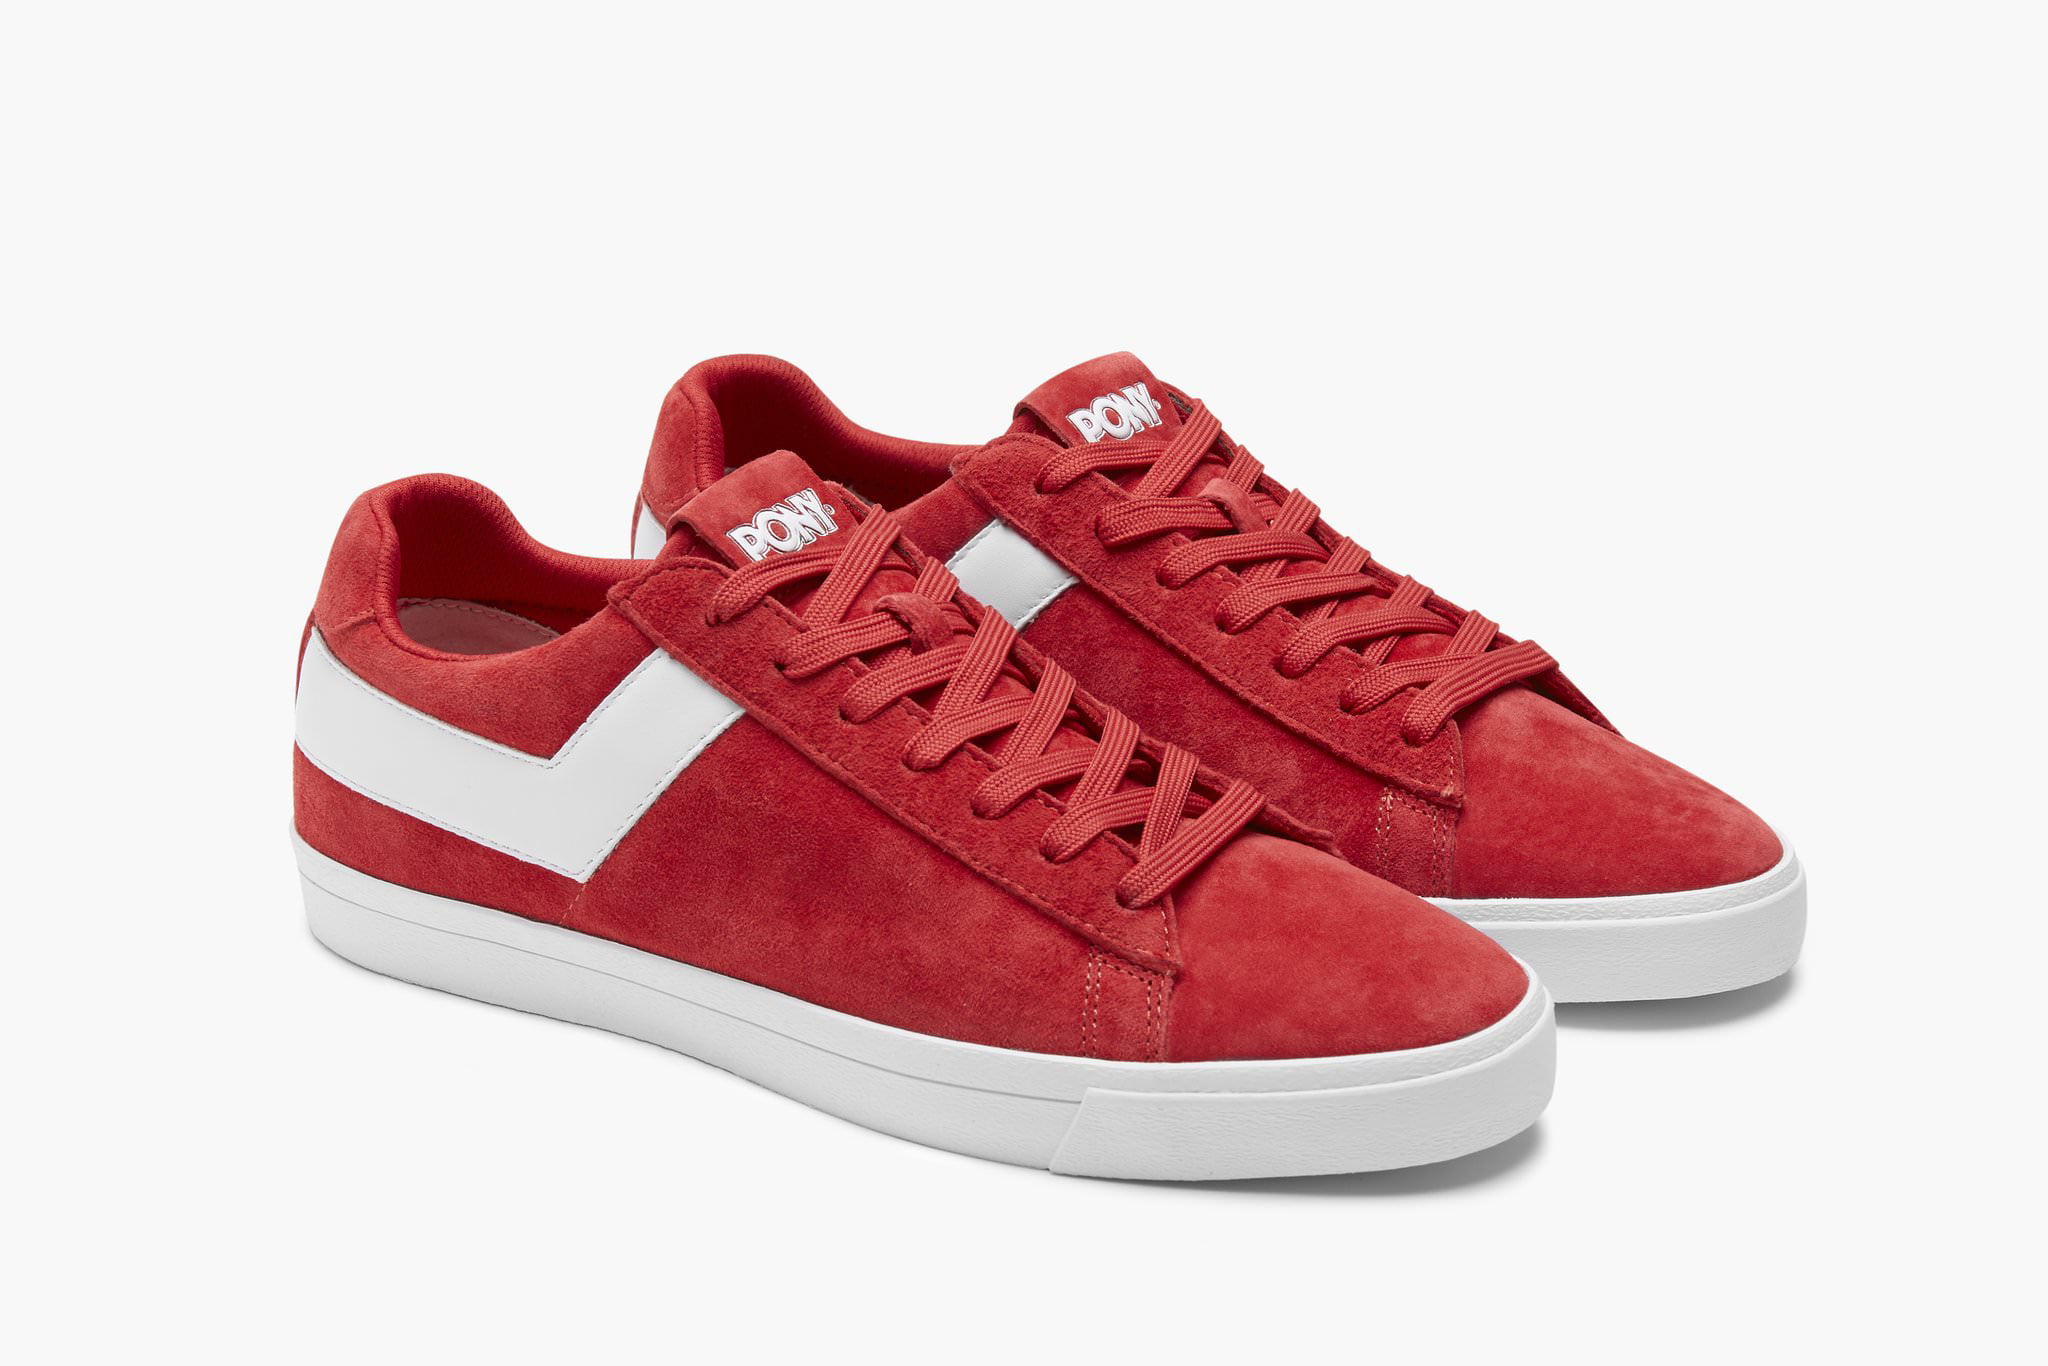 Pony TOP STAR LO CORE Womens Suede Red 